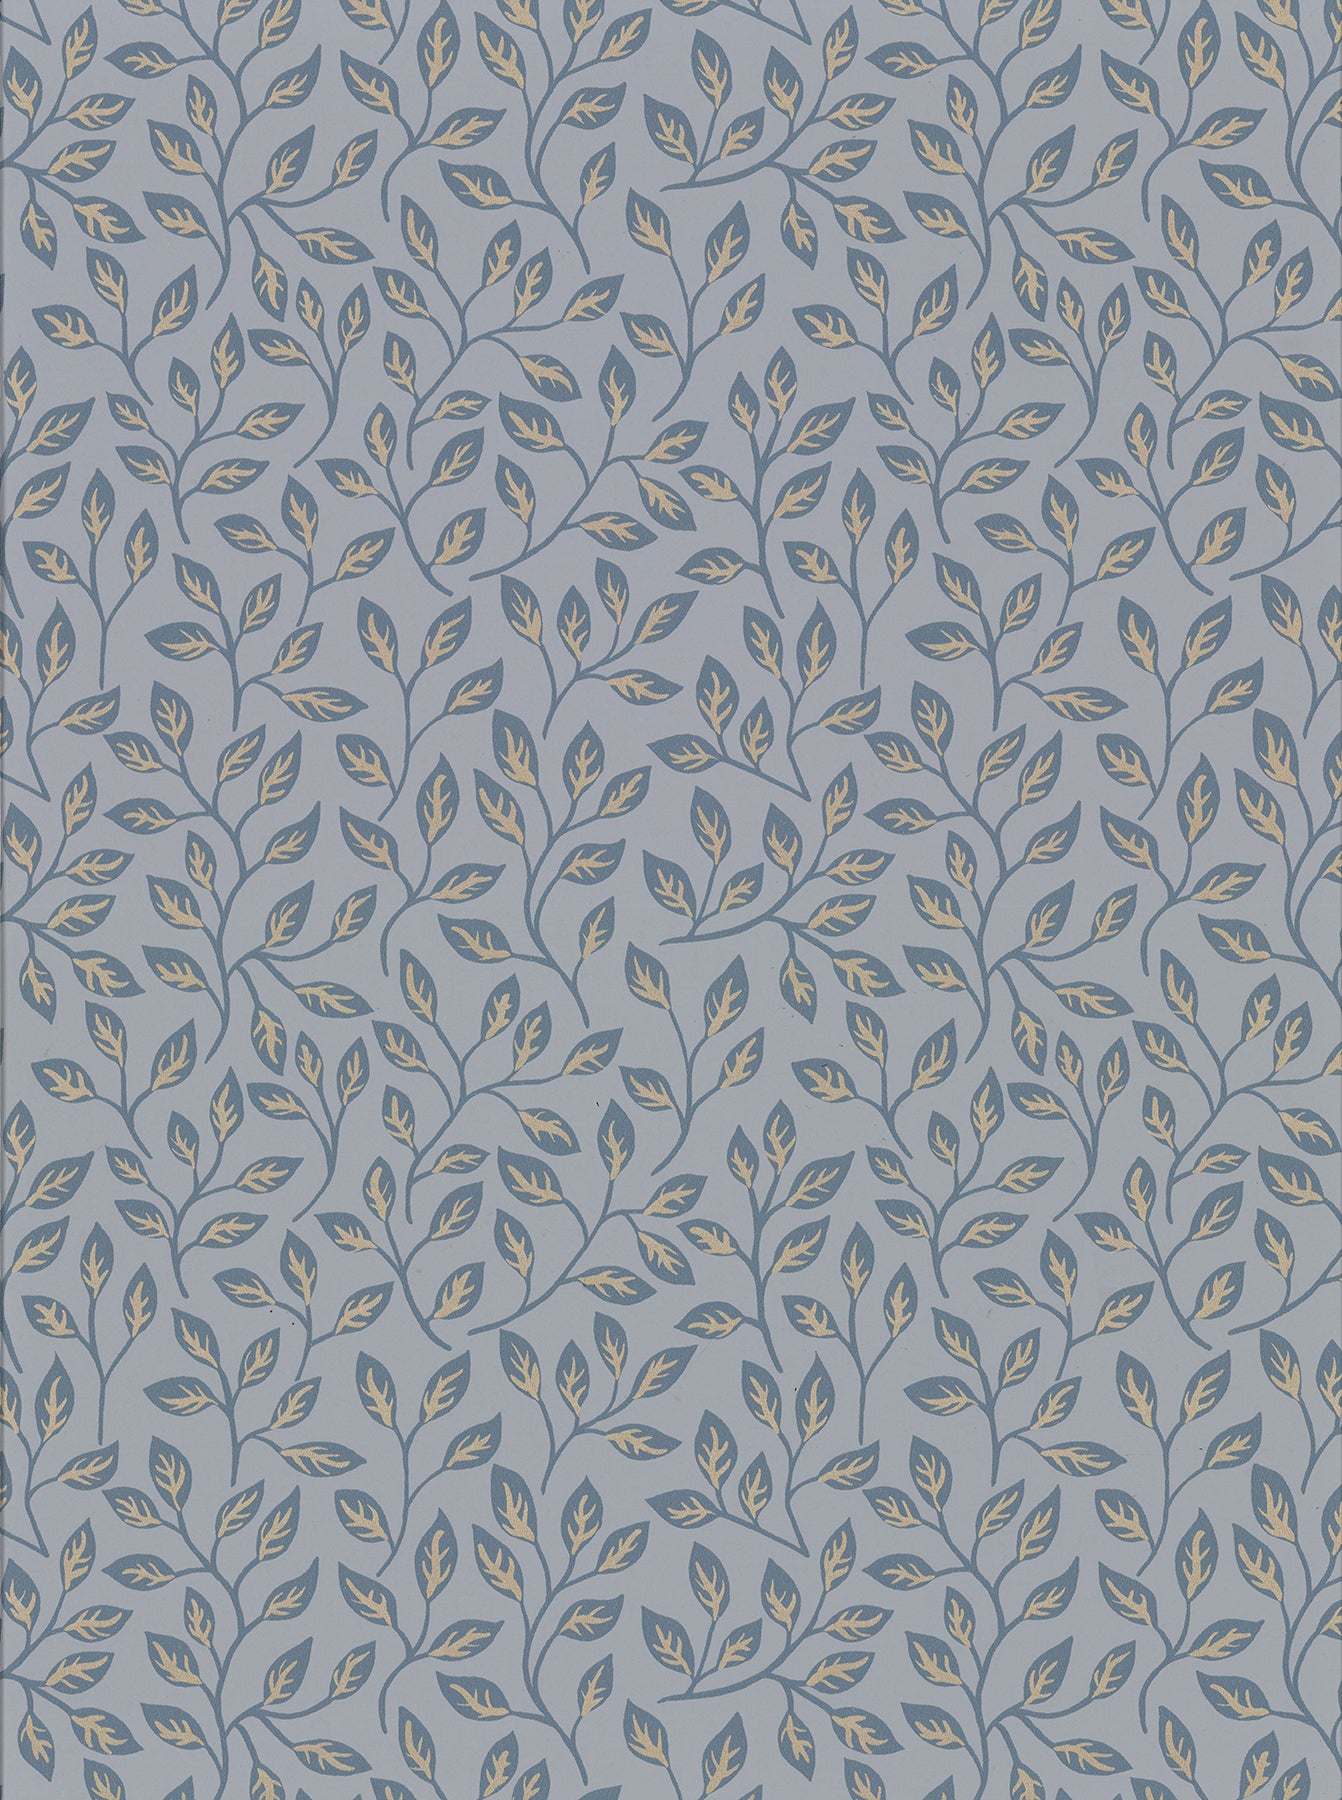 Acquire 2948-33018 Spring Posey Slate Vines Slate A-Street Prints Wallpaper